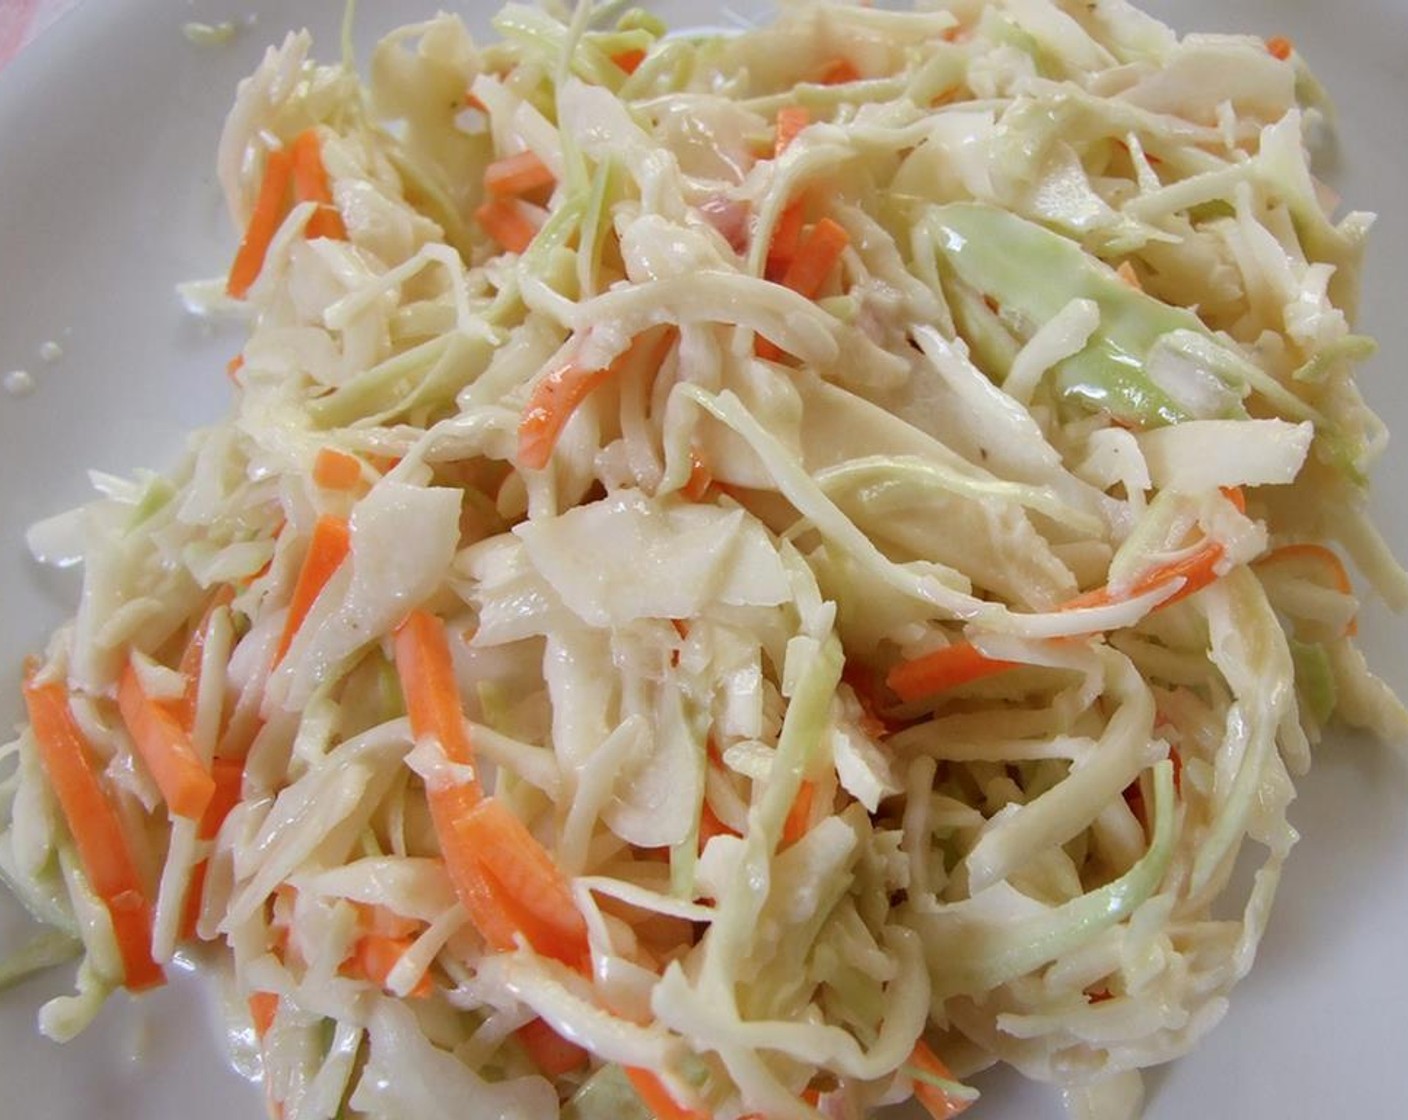 step 3 Combine the dressing with the chopped vegetables, Salt (1/4 tsp), and Freshly Ground Black Pepper (1/2 tsp) to make the coleslaw and mix well. Set aside in the fridge.